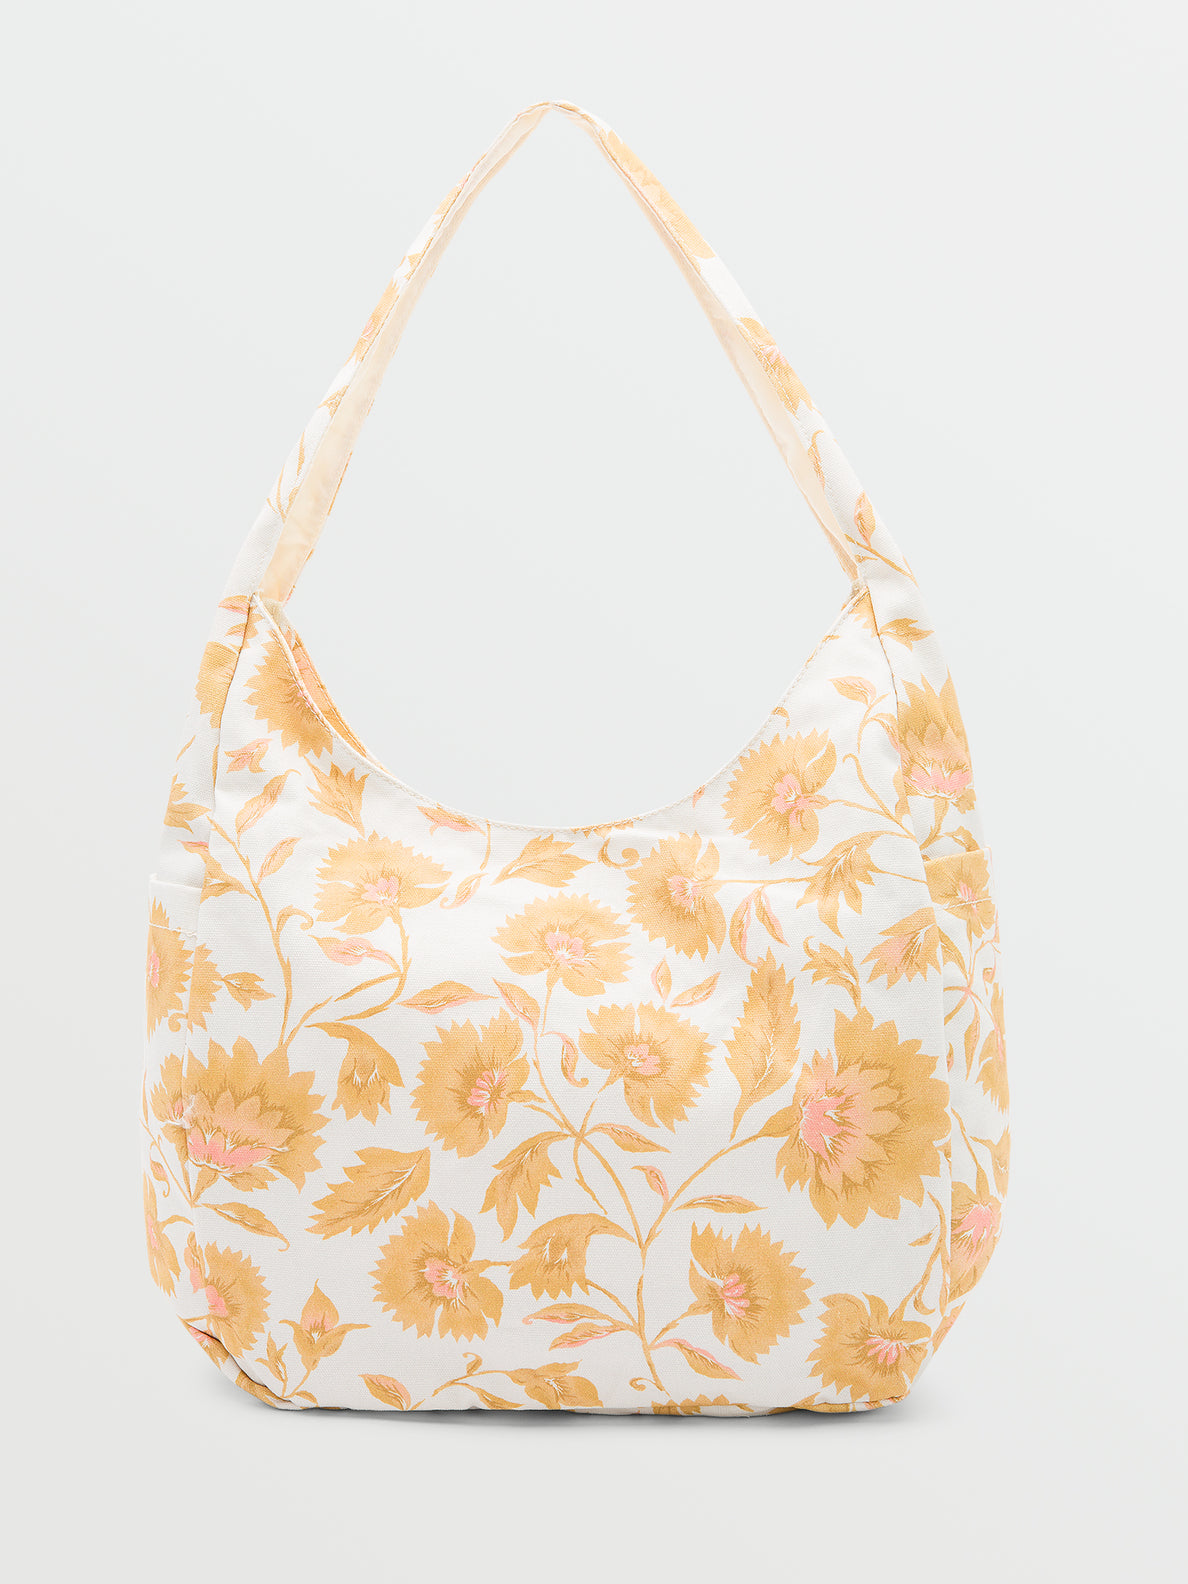 Schoolyard Canvas Hobo Tote - Dust Gold